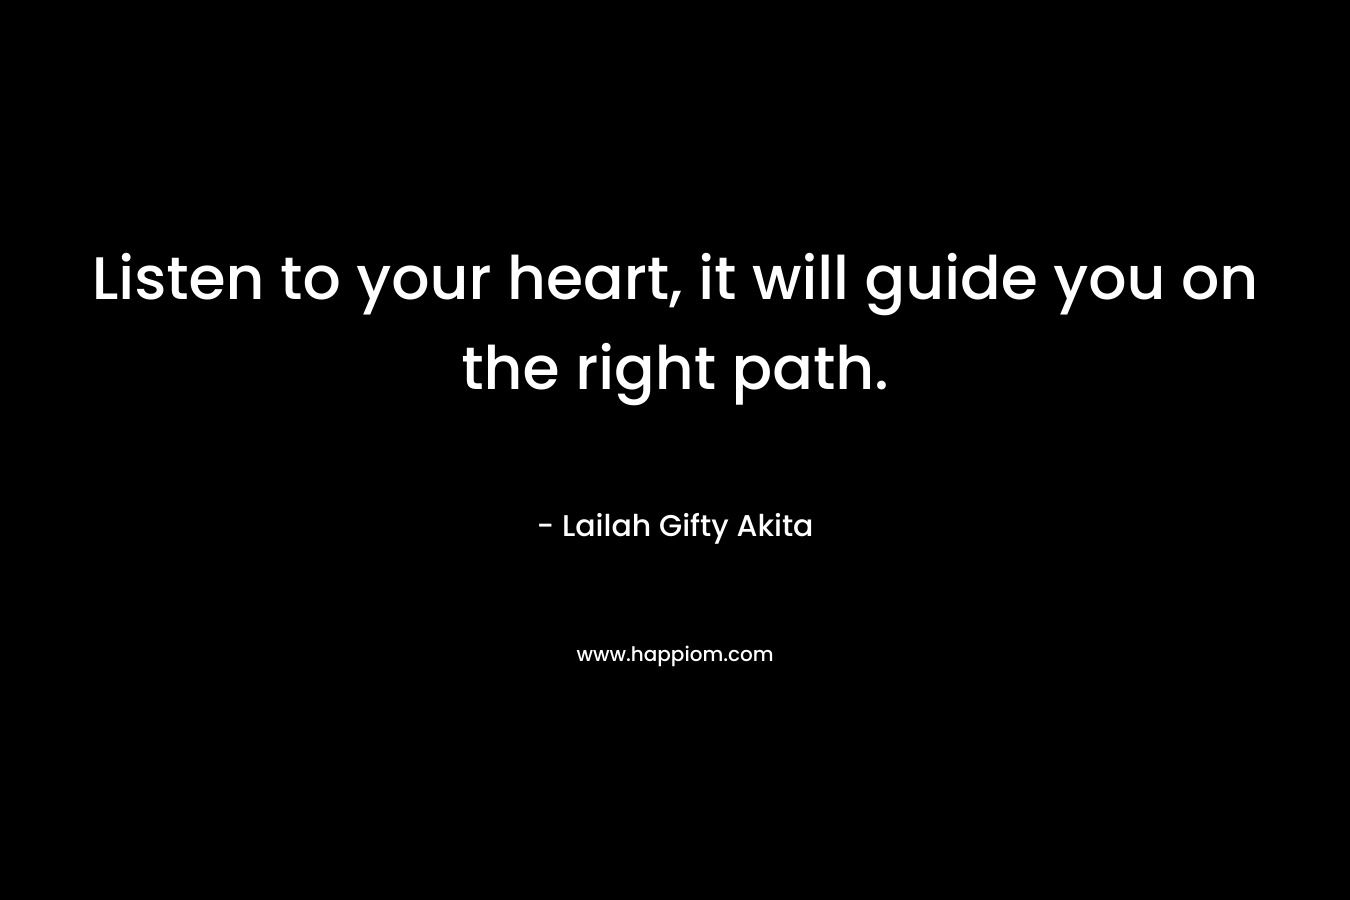 Listen to your heart, it will guide you on the right path.